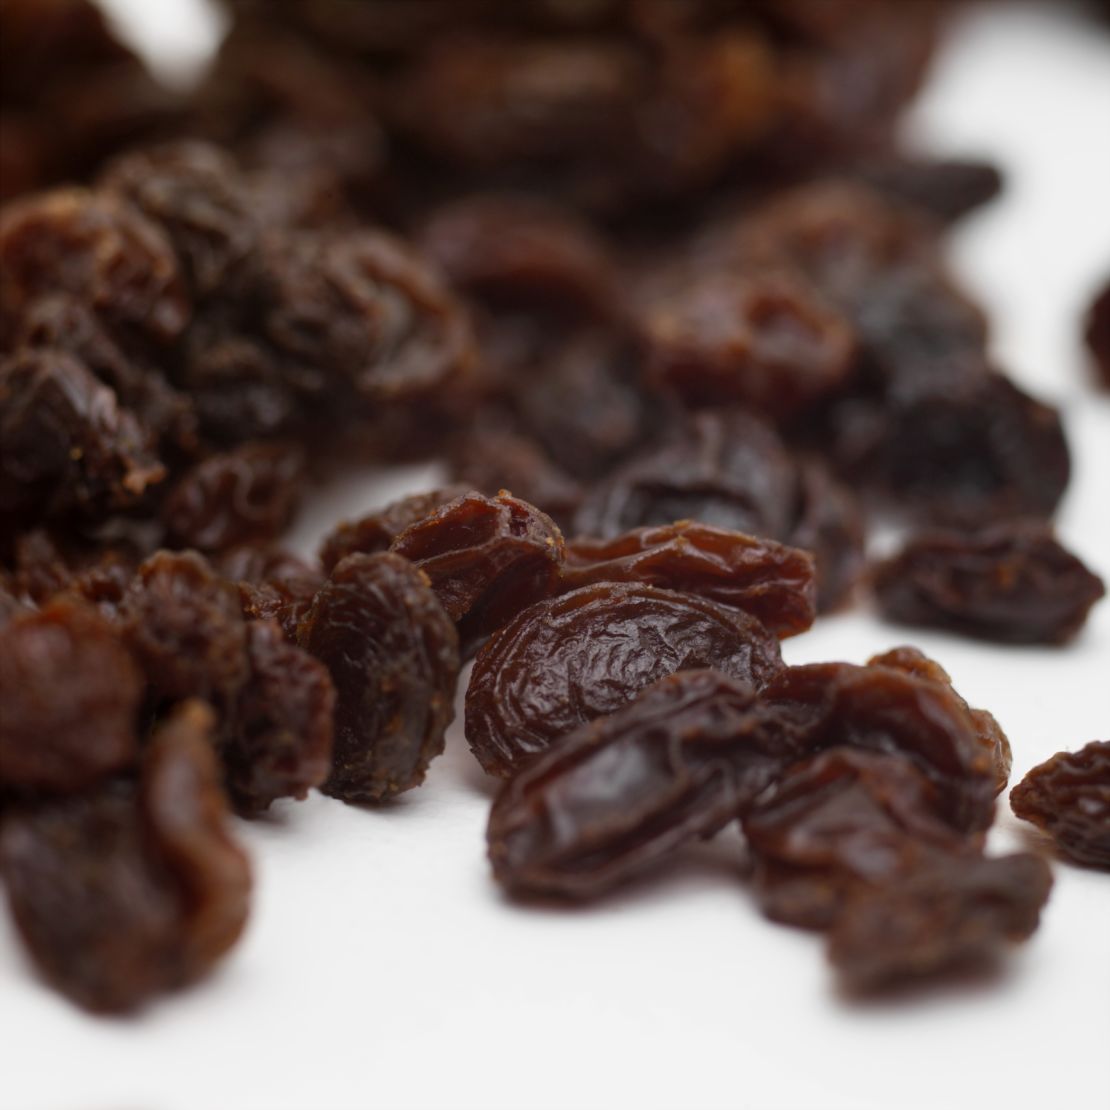 A handful of raisins can go a long way is eaten before a workout